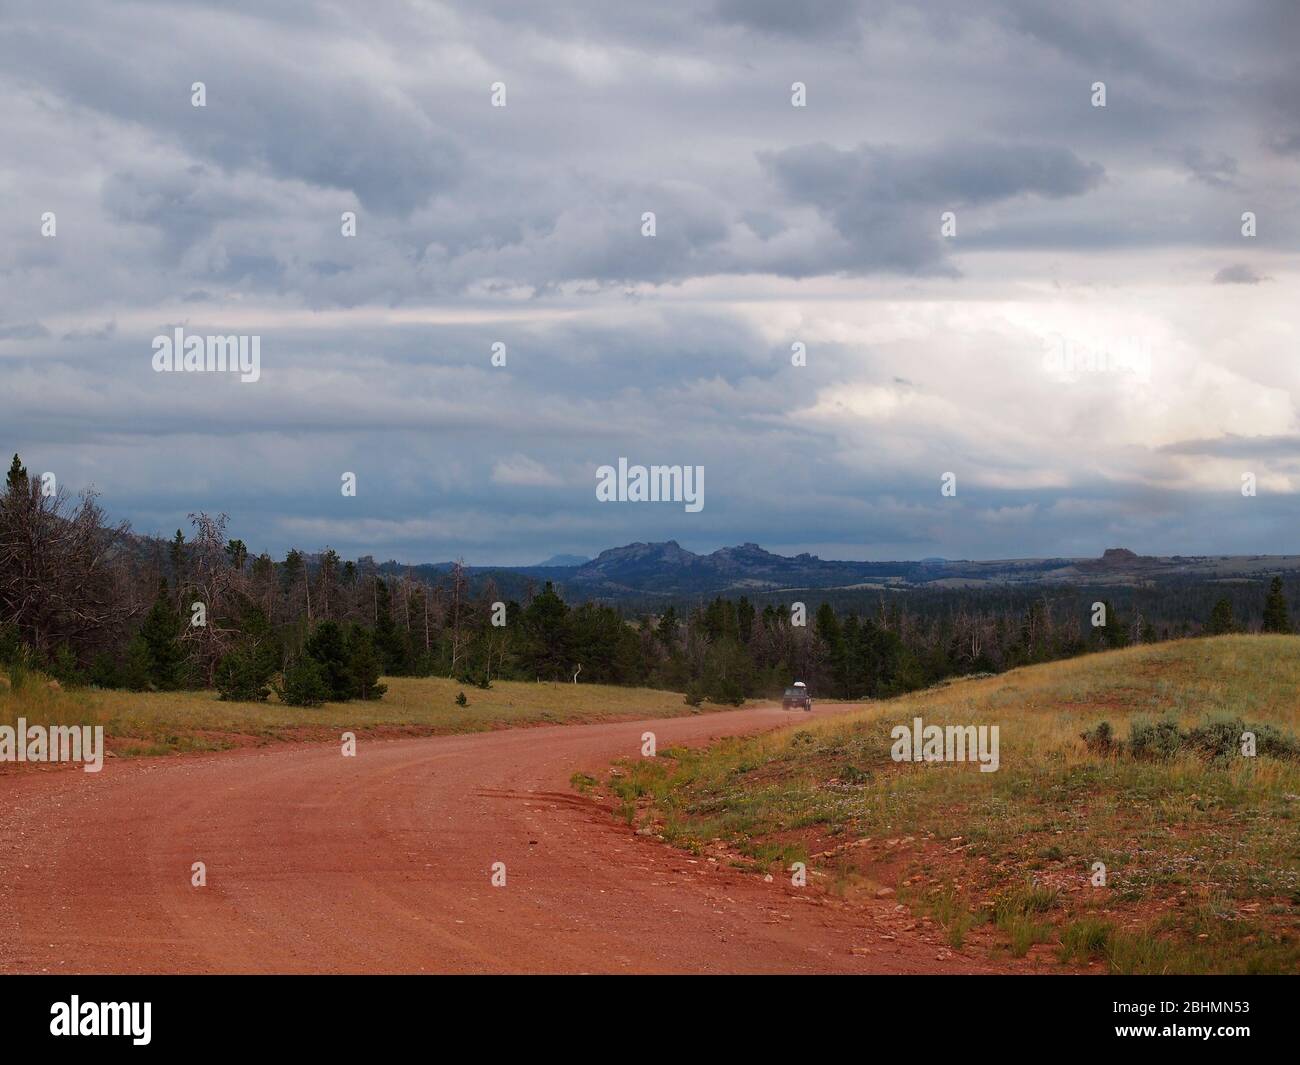 A sport utililty vehicle with a rooftop cargo carrier drives down a curvy dirt road into a rural Wyoming woodland landscape with buttes in the far dis Stock Photo